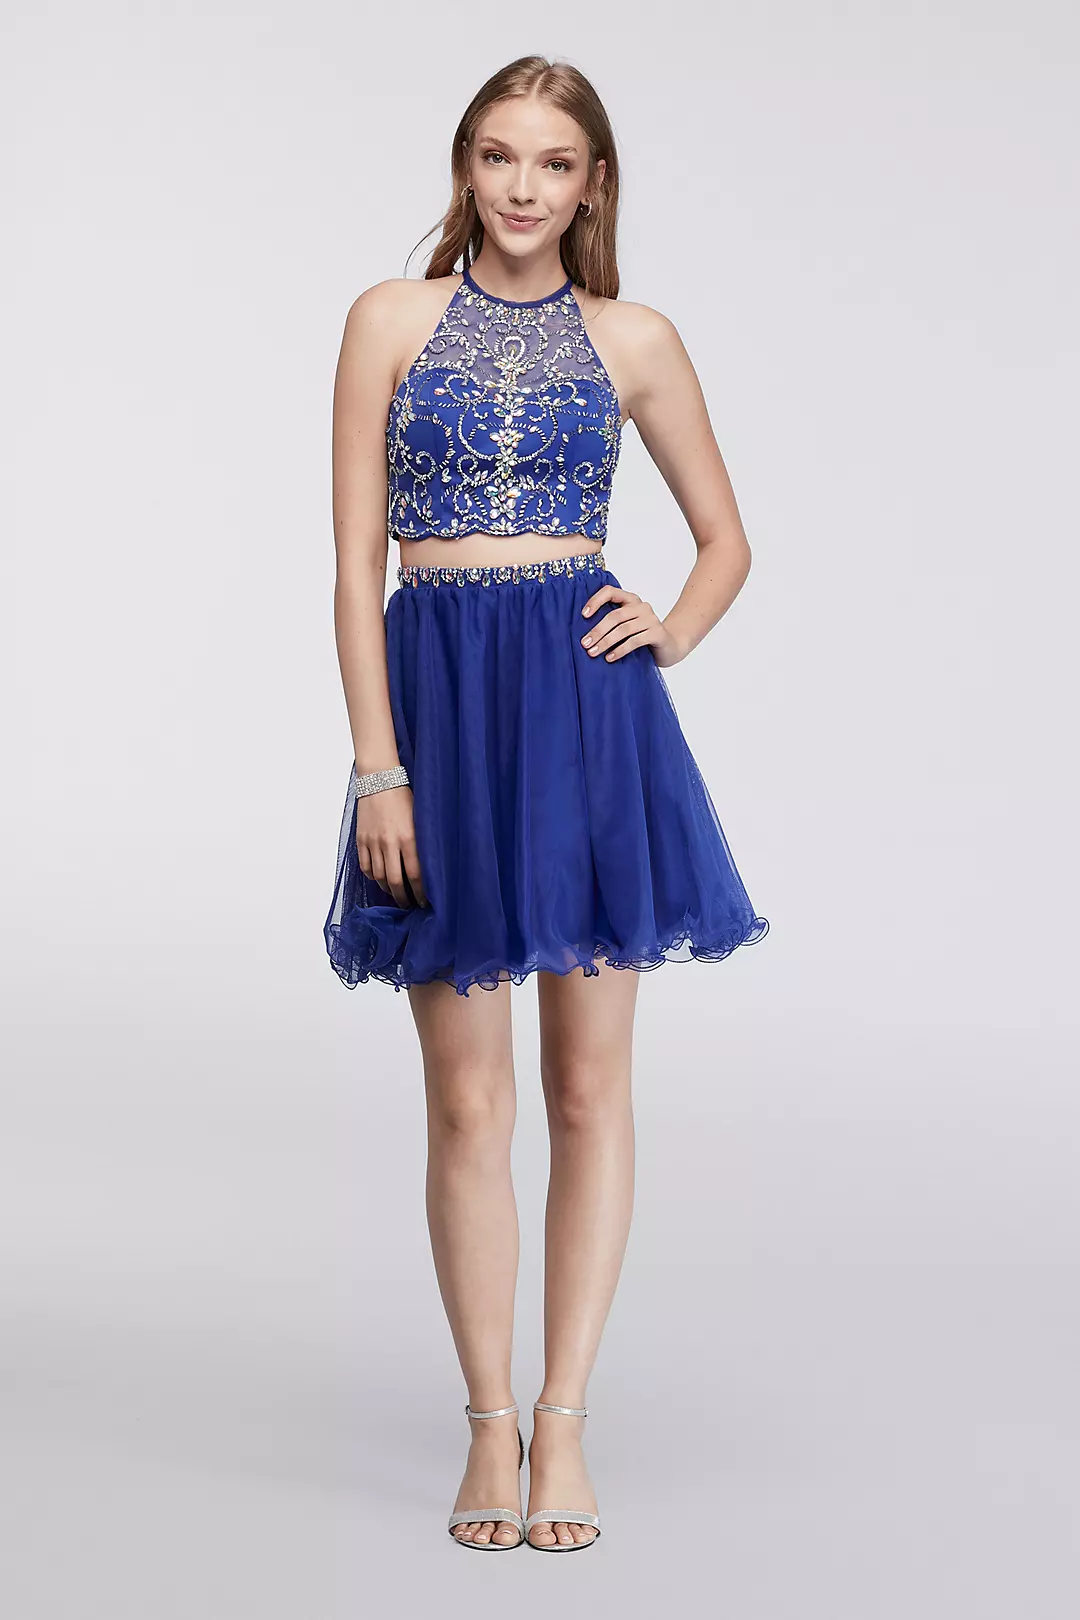 Homecoming Halter Crop Top and Matching Skirt Image